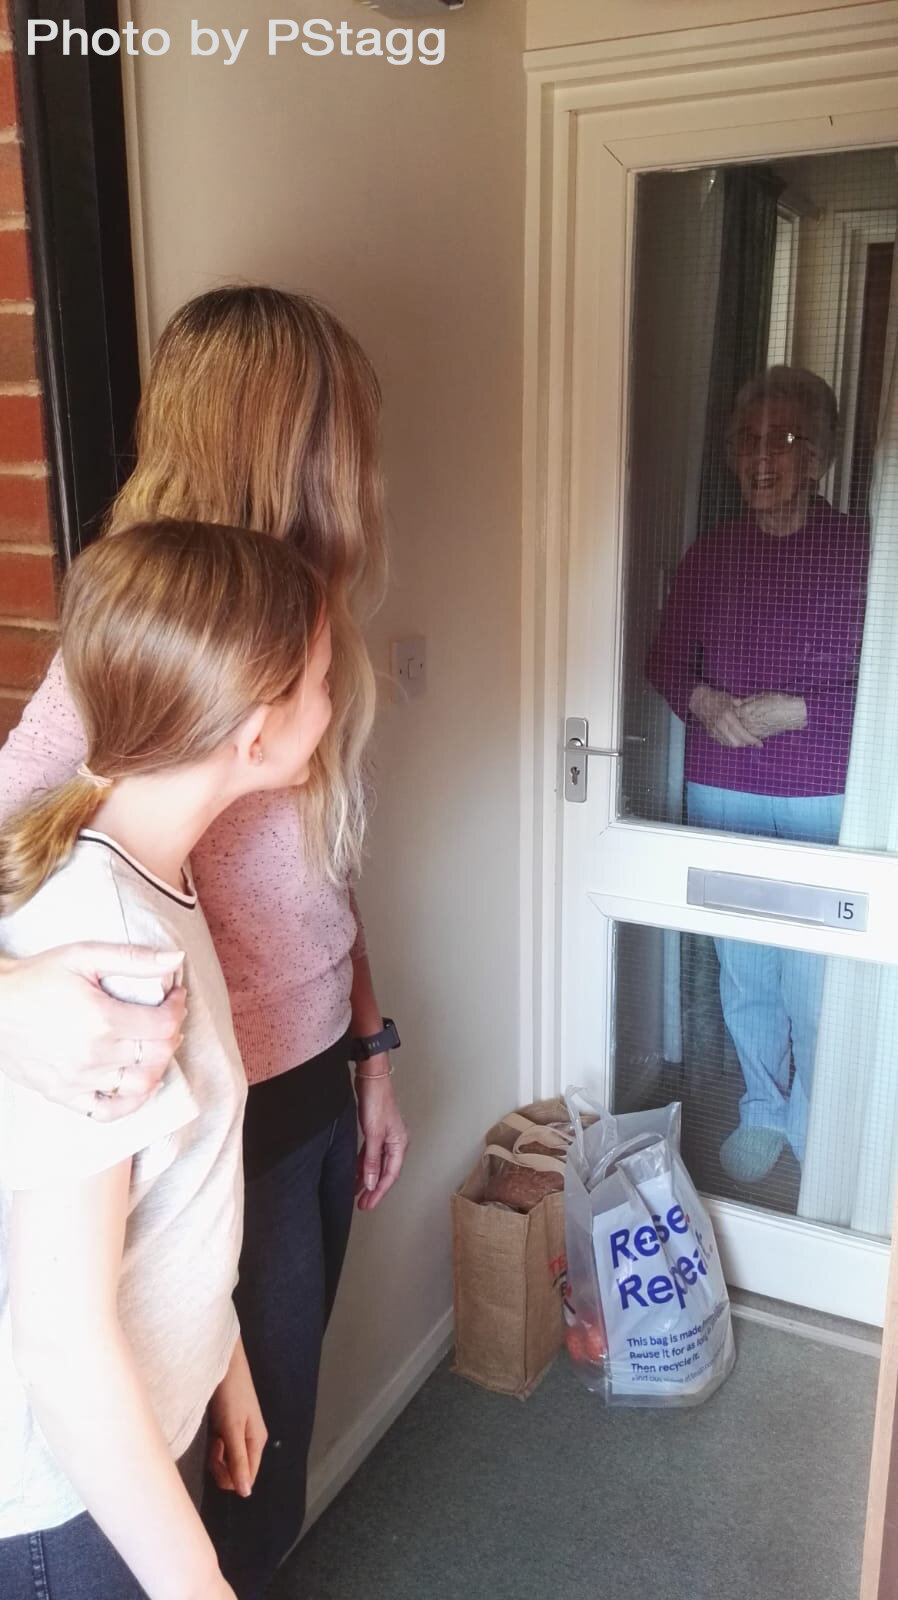 Daughter and Granddaughter delivering food supplies to grandmother during isolation, Barnstaple 210420 PStagg.jpg